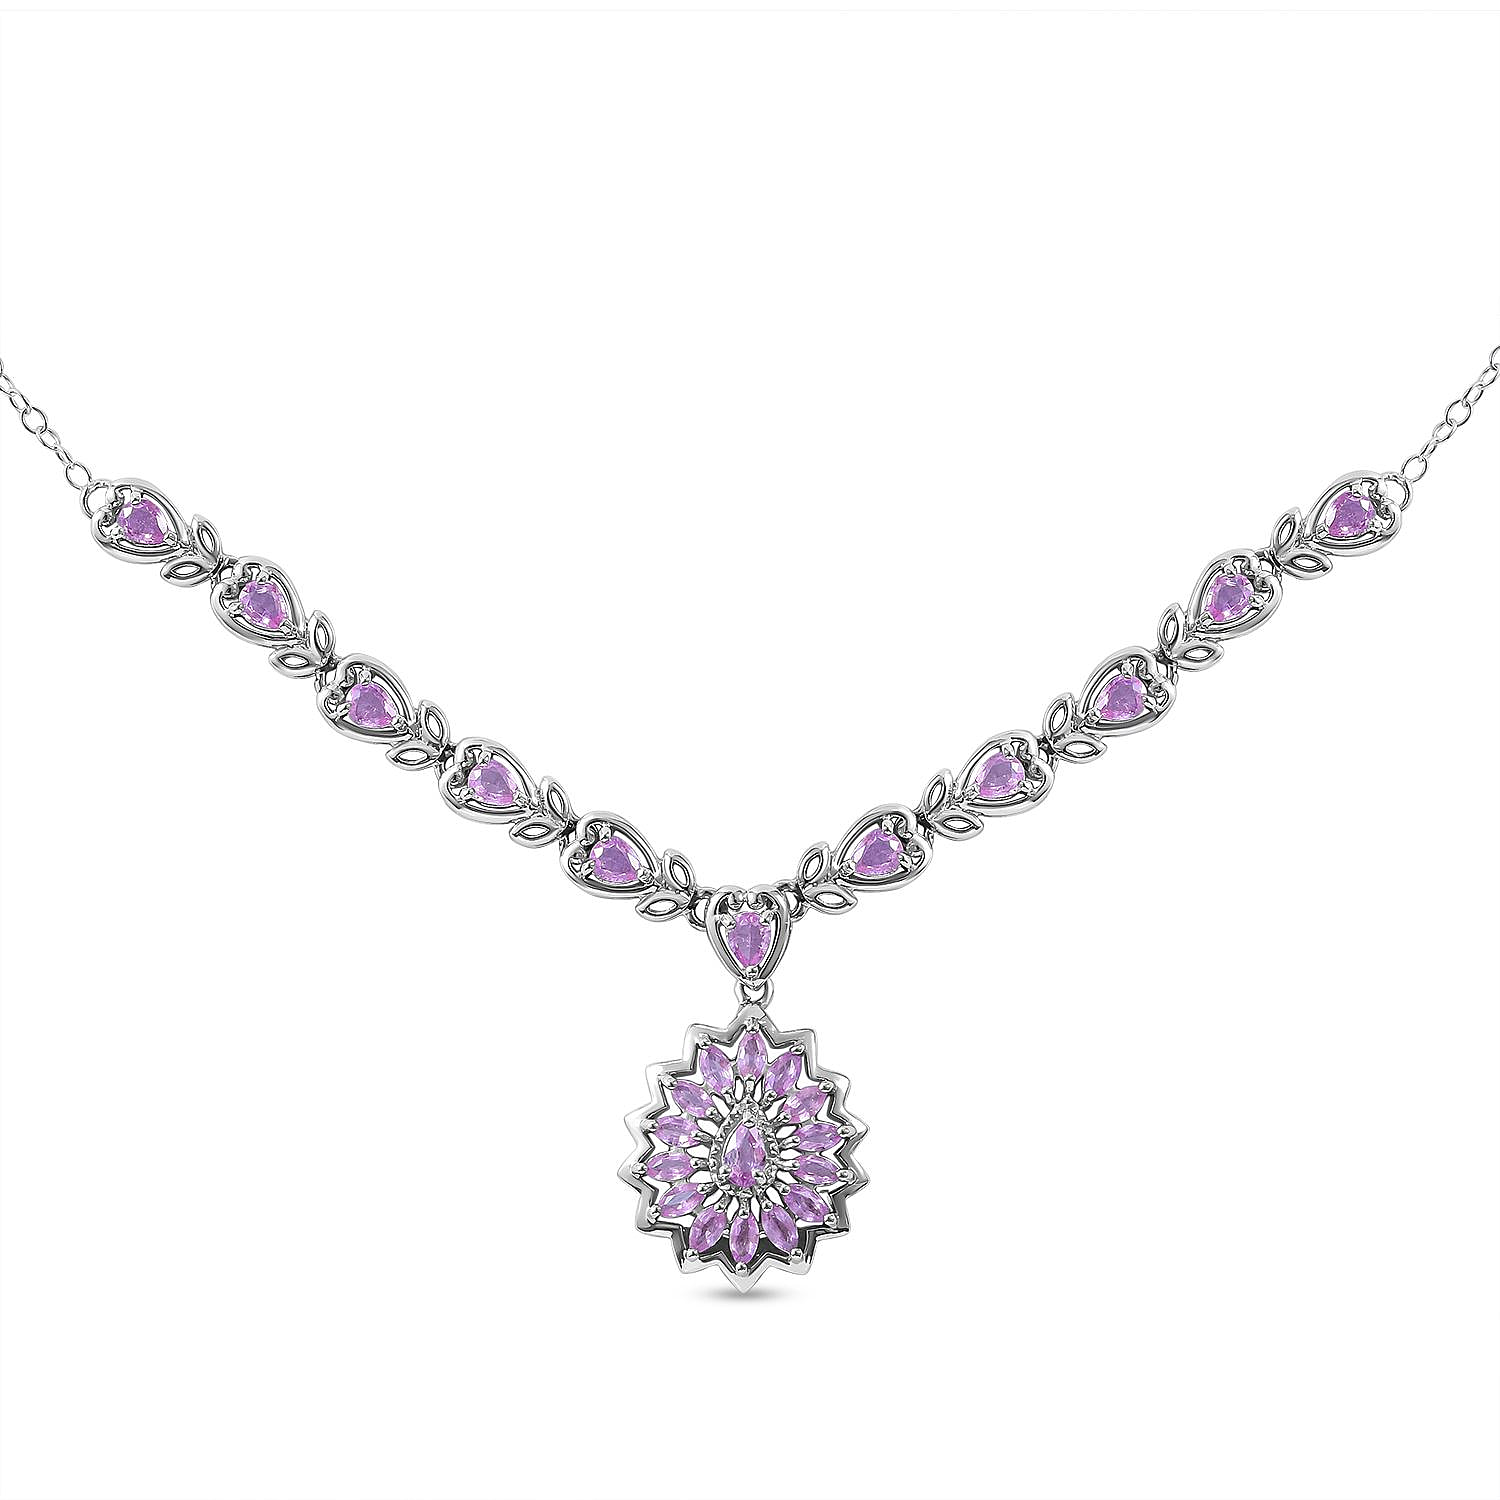 Madagascar Pink Sapphire Necklace (Size - 18-2 Inch Ext.) in Rhodium Overlay Sterling Silver 3.77 Ct, Silver Wt. 10 Gms